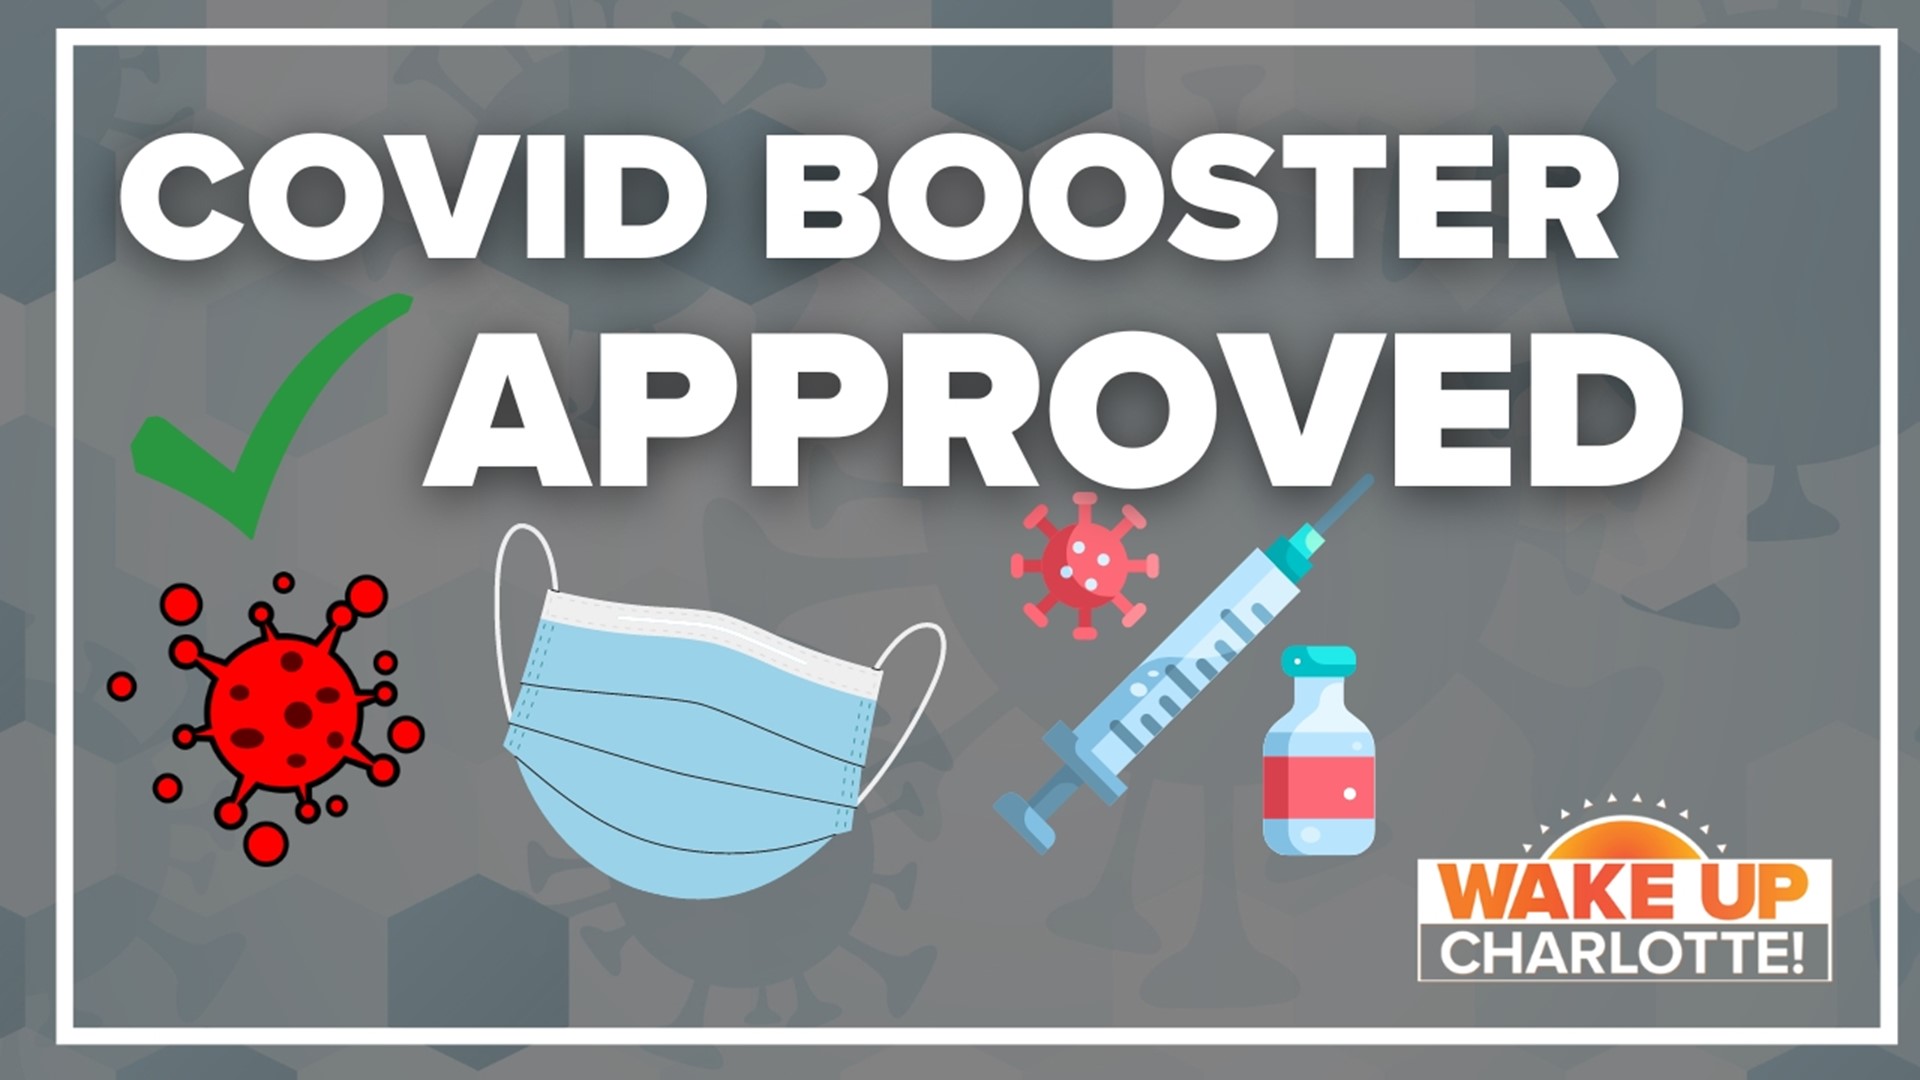 New covid-19 boosters that target today's most common omicron strains are set to start soon.